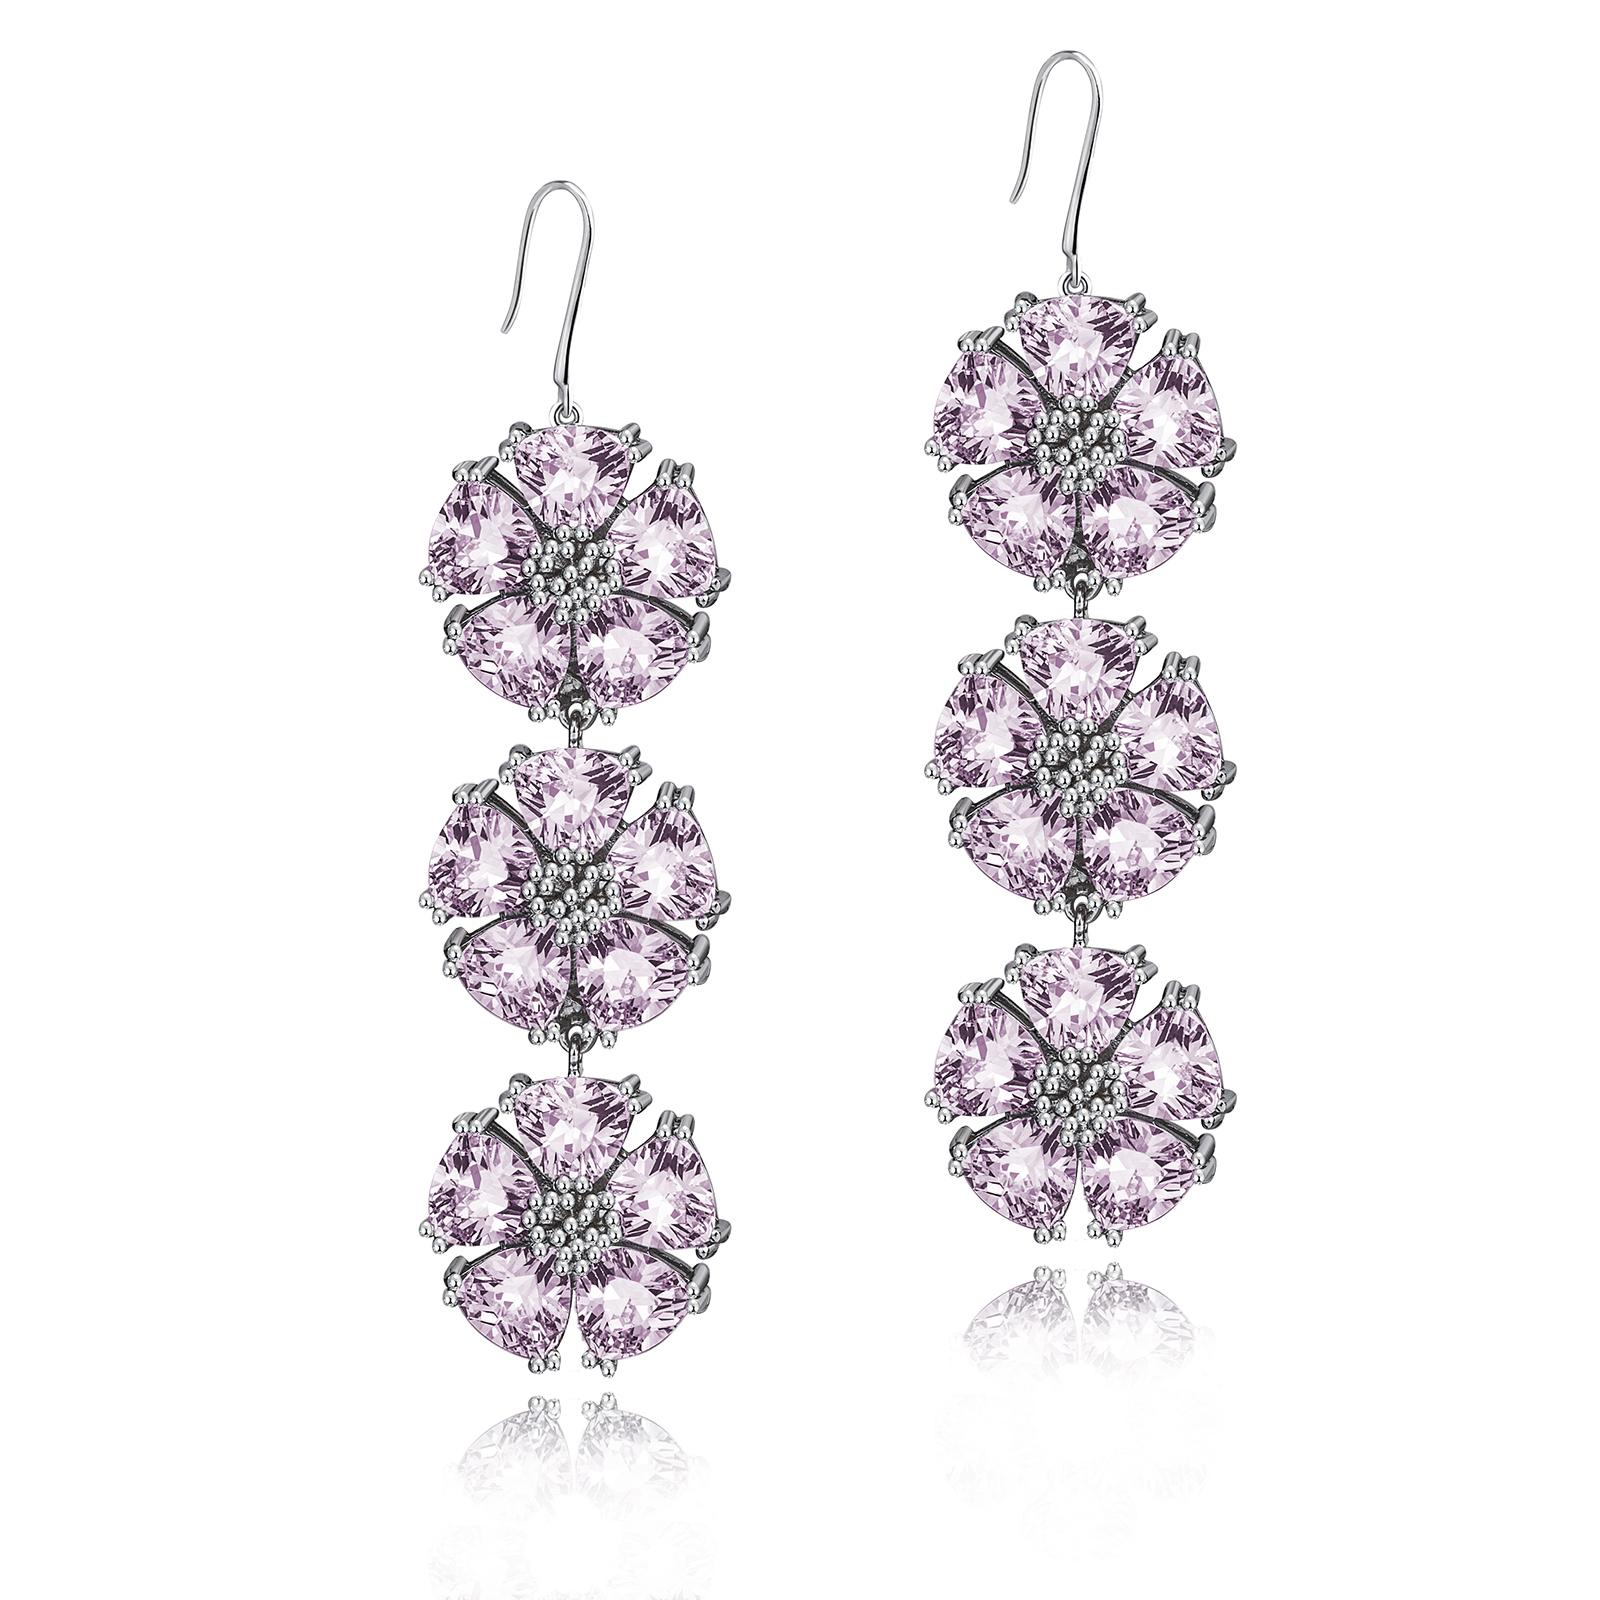 Designed in NYC

.925 Sterling Silver 30 x 7 mm Amethyst Triple Blossom Stone Bling Earrings. No matter the season, allow natural beauty to surround you wherever you go. Triple blossom stone bling earrings: 

Sterling silver 
High-polish